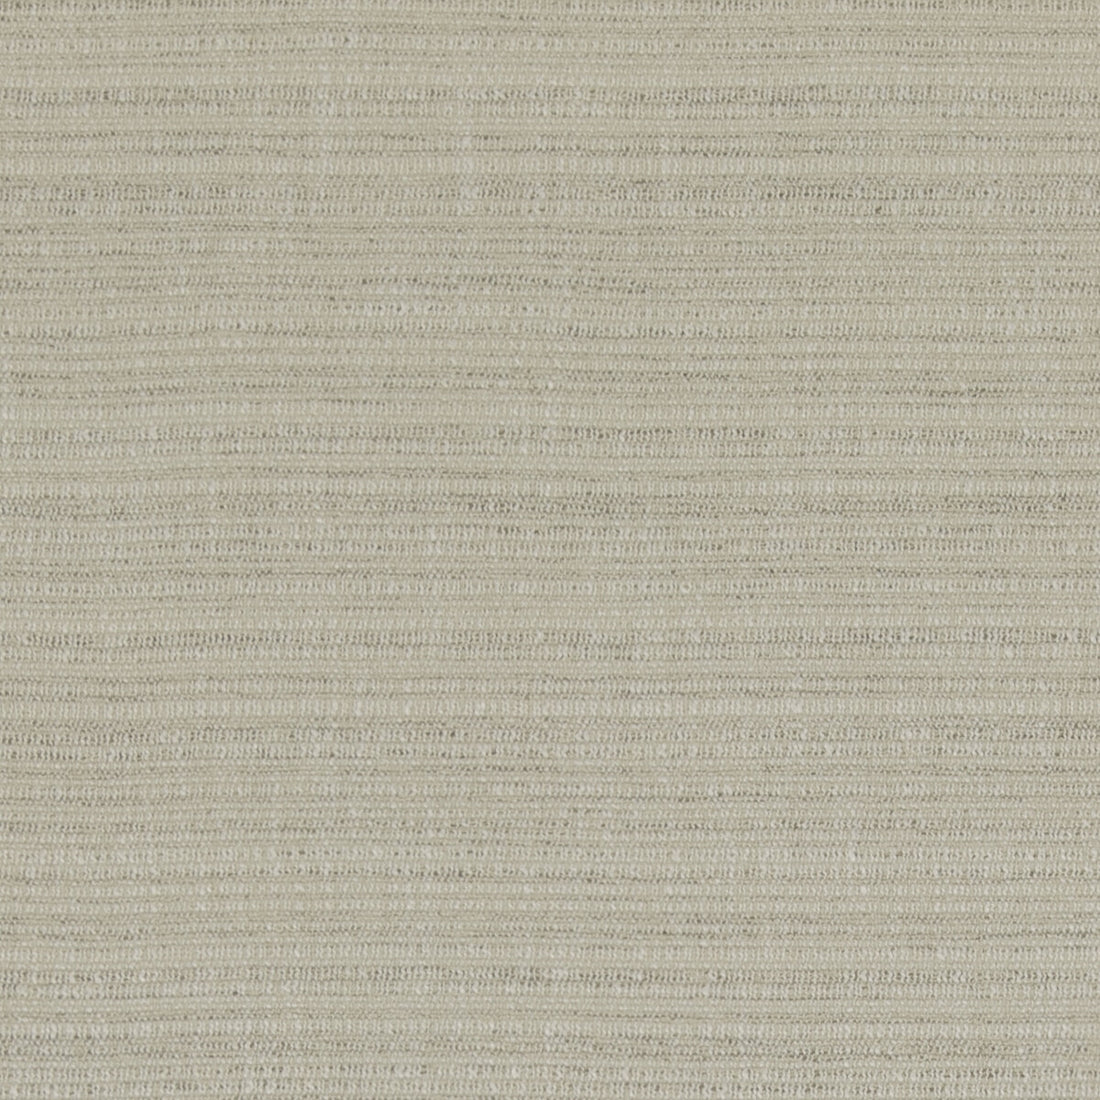 Mendoza fabric in ivory color - pattern ED85368.104.0 - by Threads in the Quintessential Textures collection